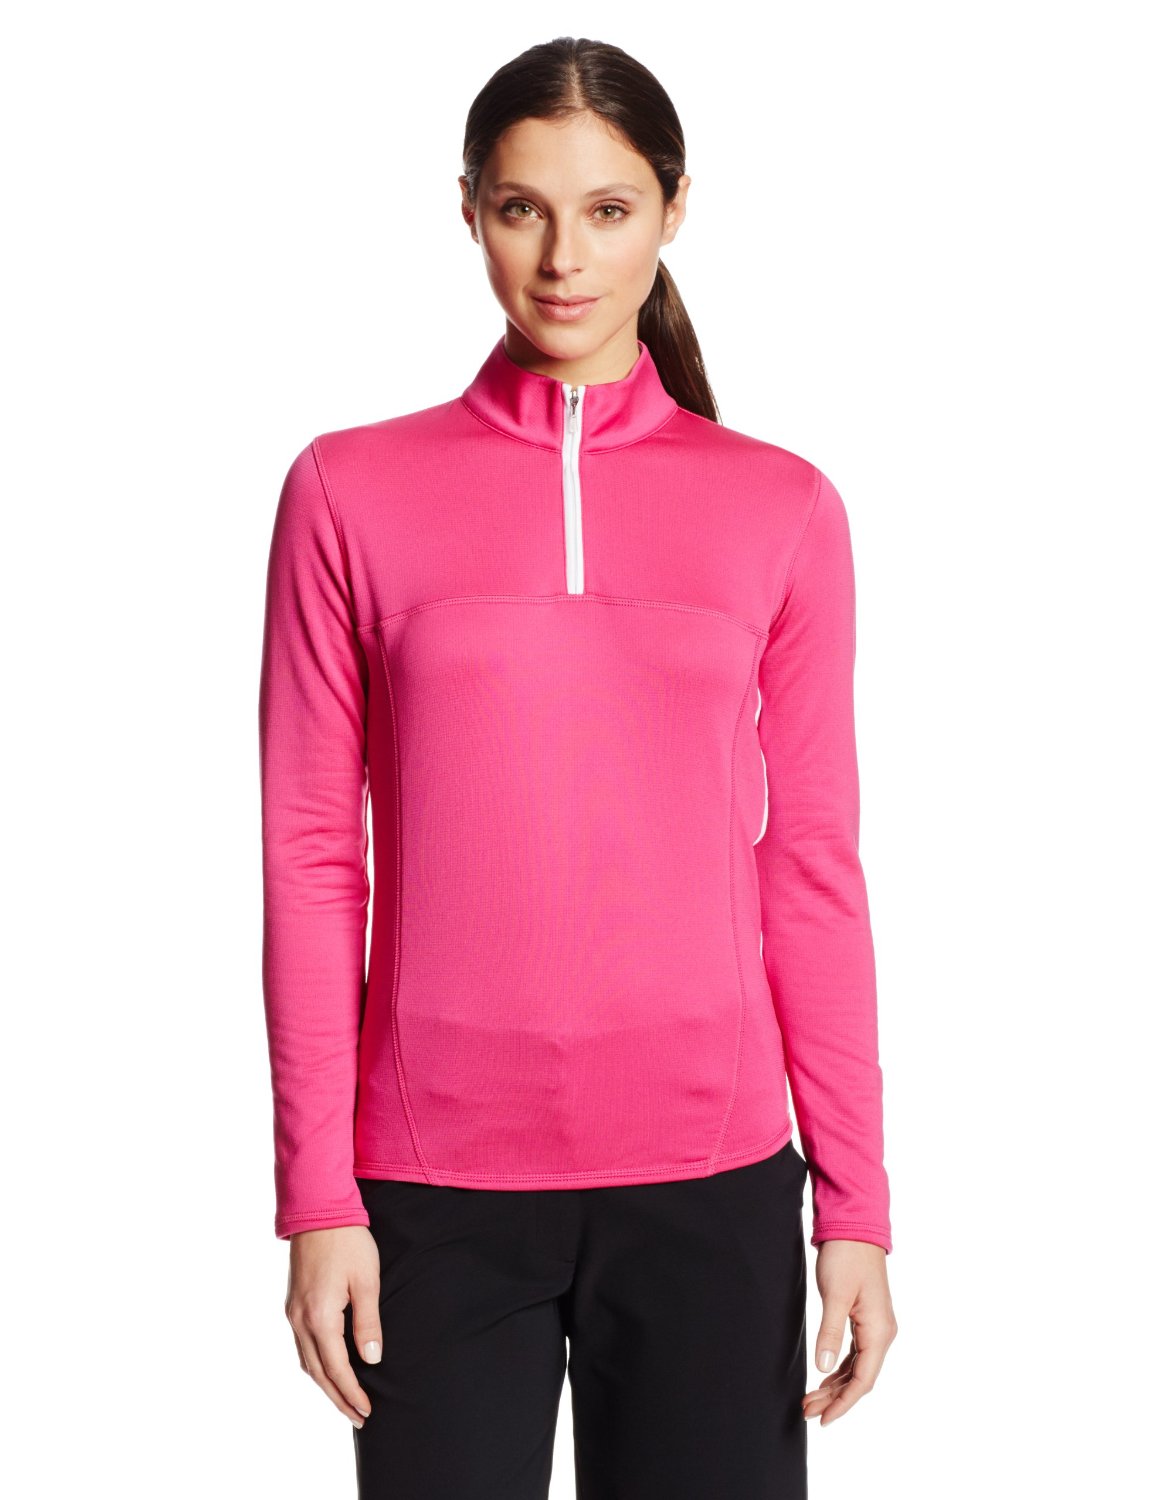 Womens Adidas Climawarm Plus Golf Pullovers